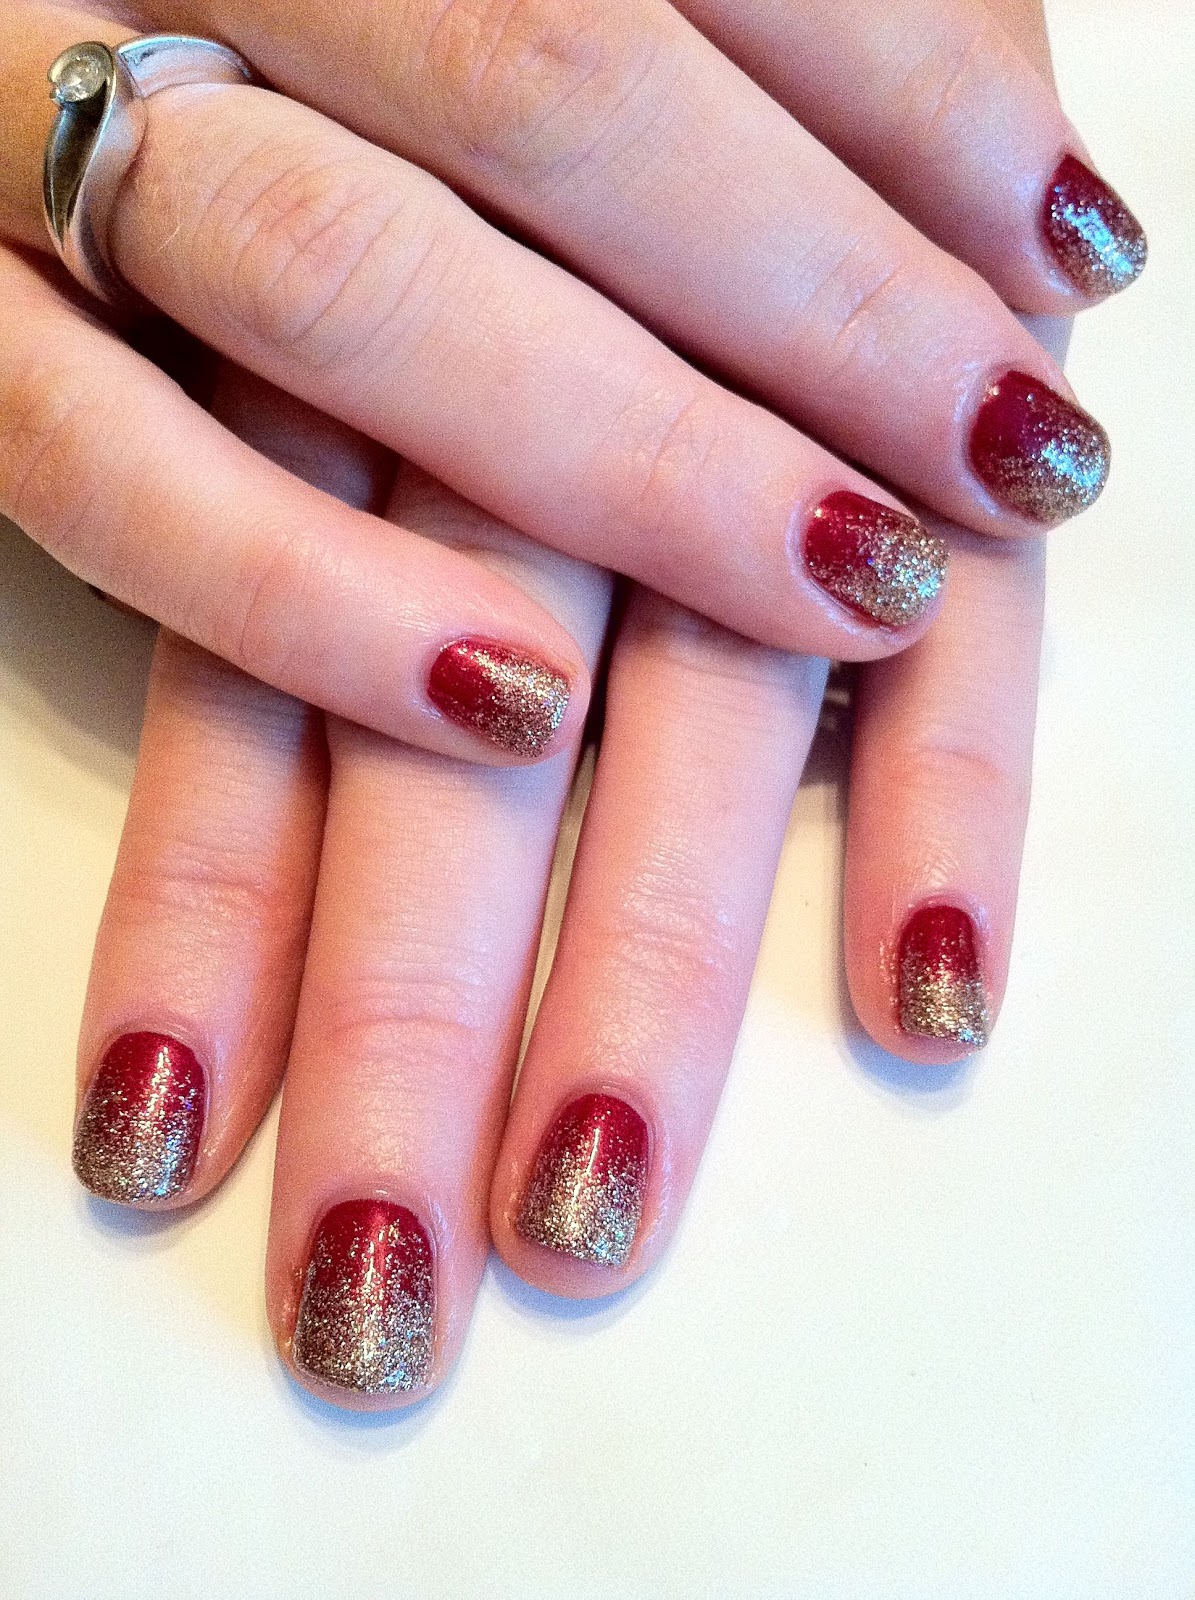 Brush up and Polish up!: Christmas nails - it's all about the Red...